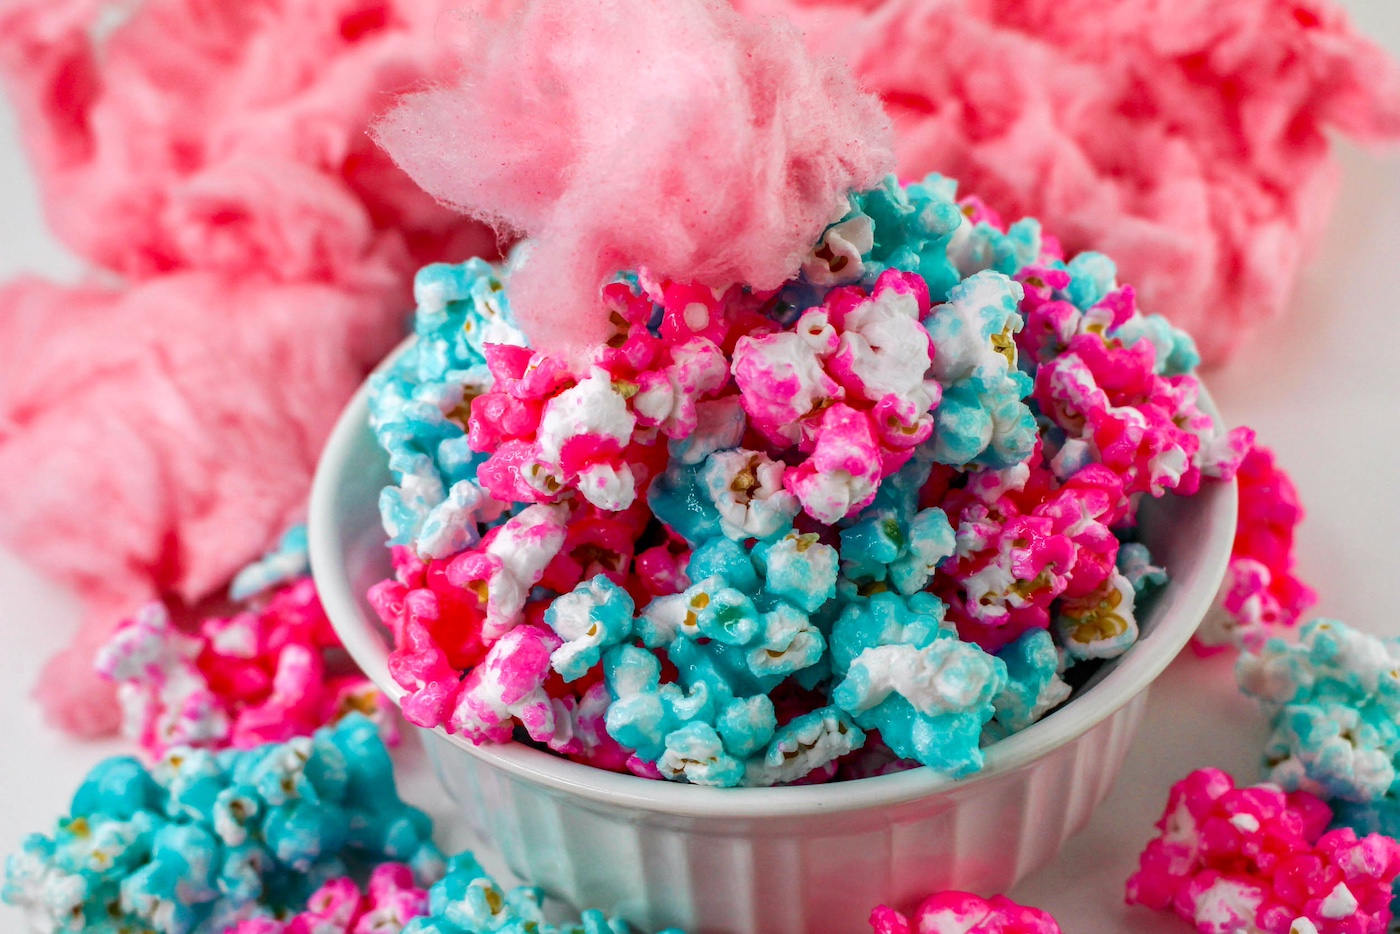 Garnish with Cotton Candy